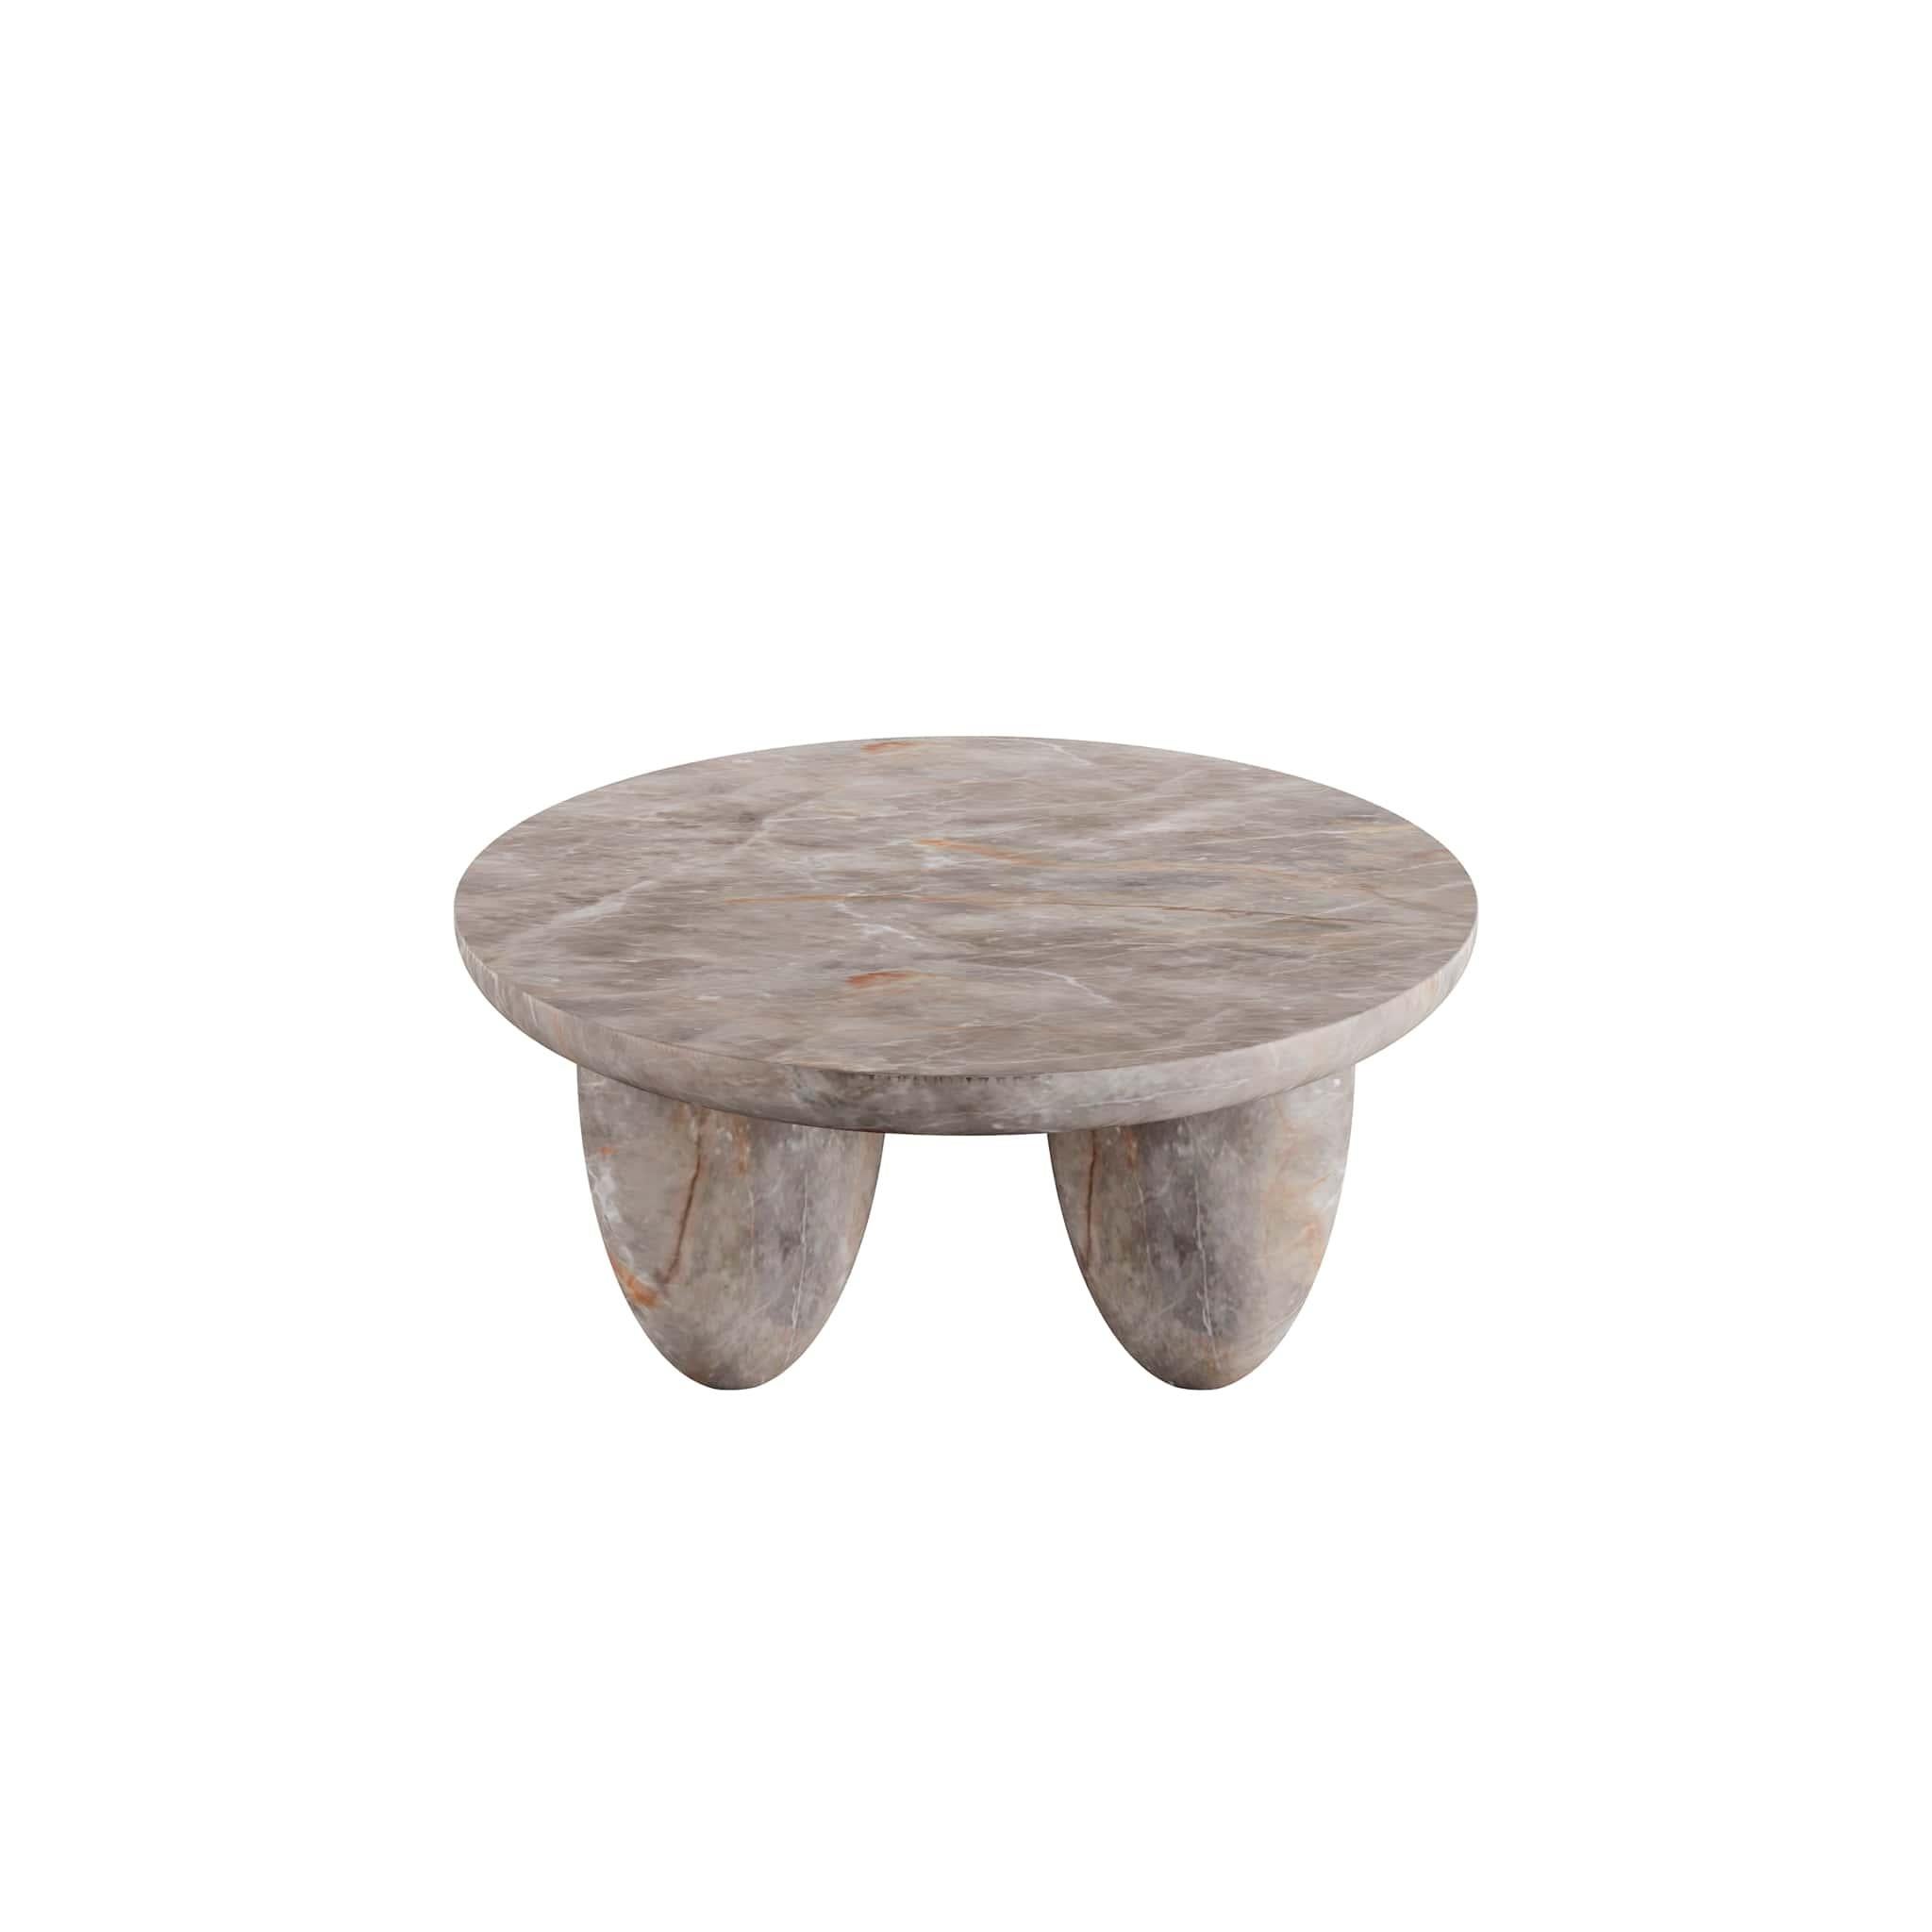 Organic Modern Contemporary Minimal Outdoor & Indoor Oval Coffee Table Fior Di Bosco Marble For Sale